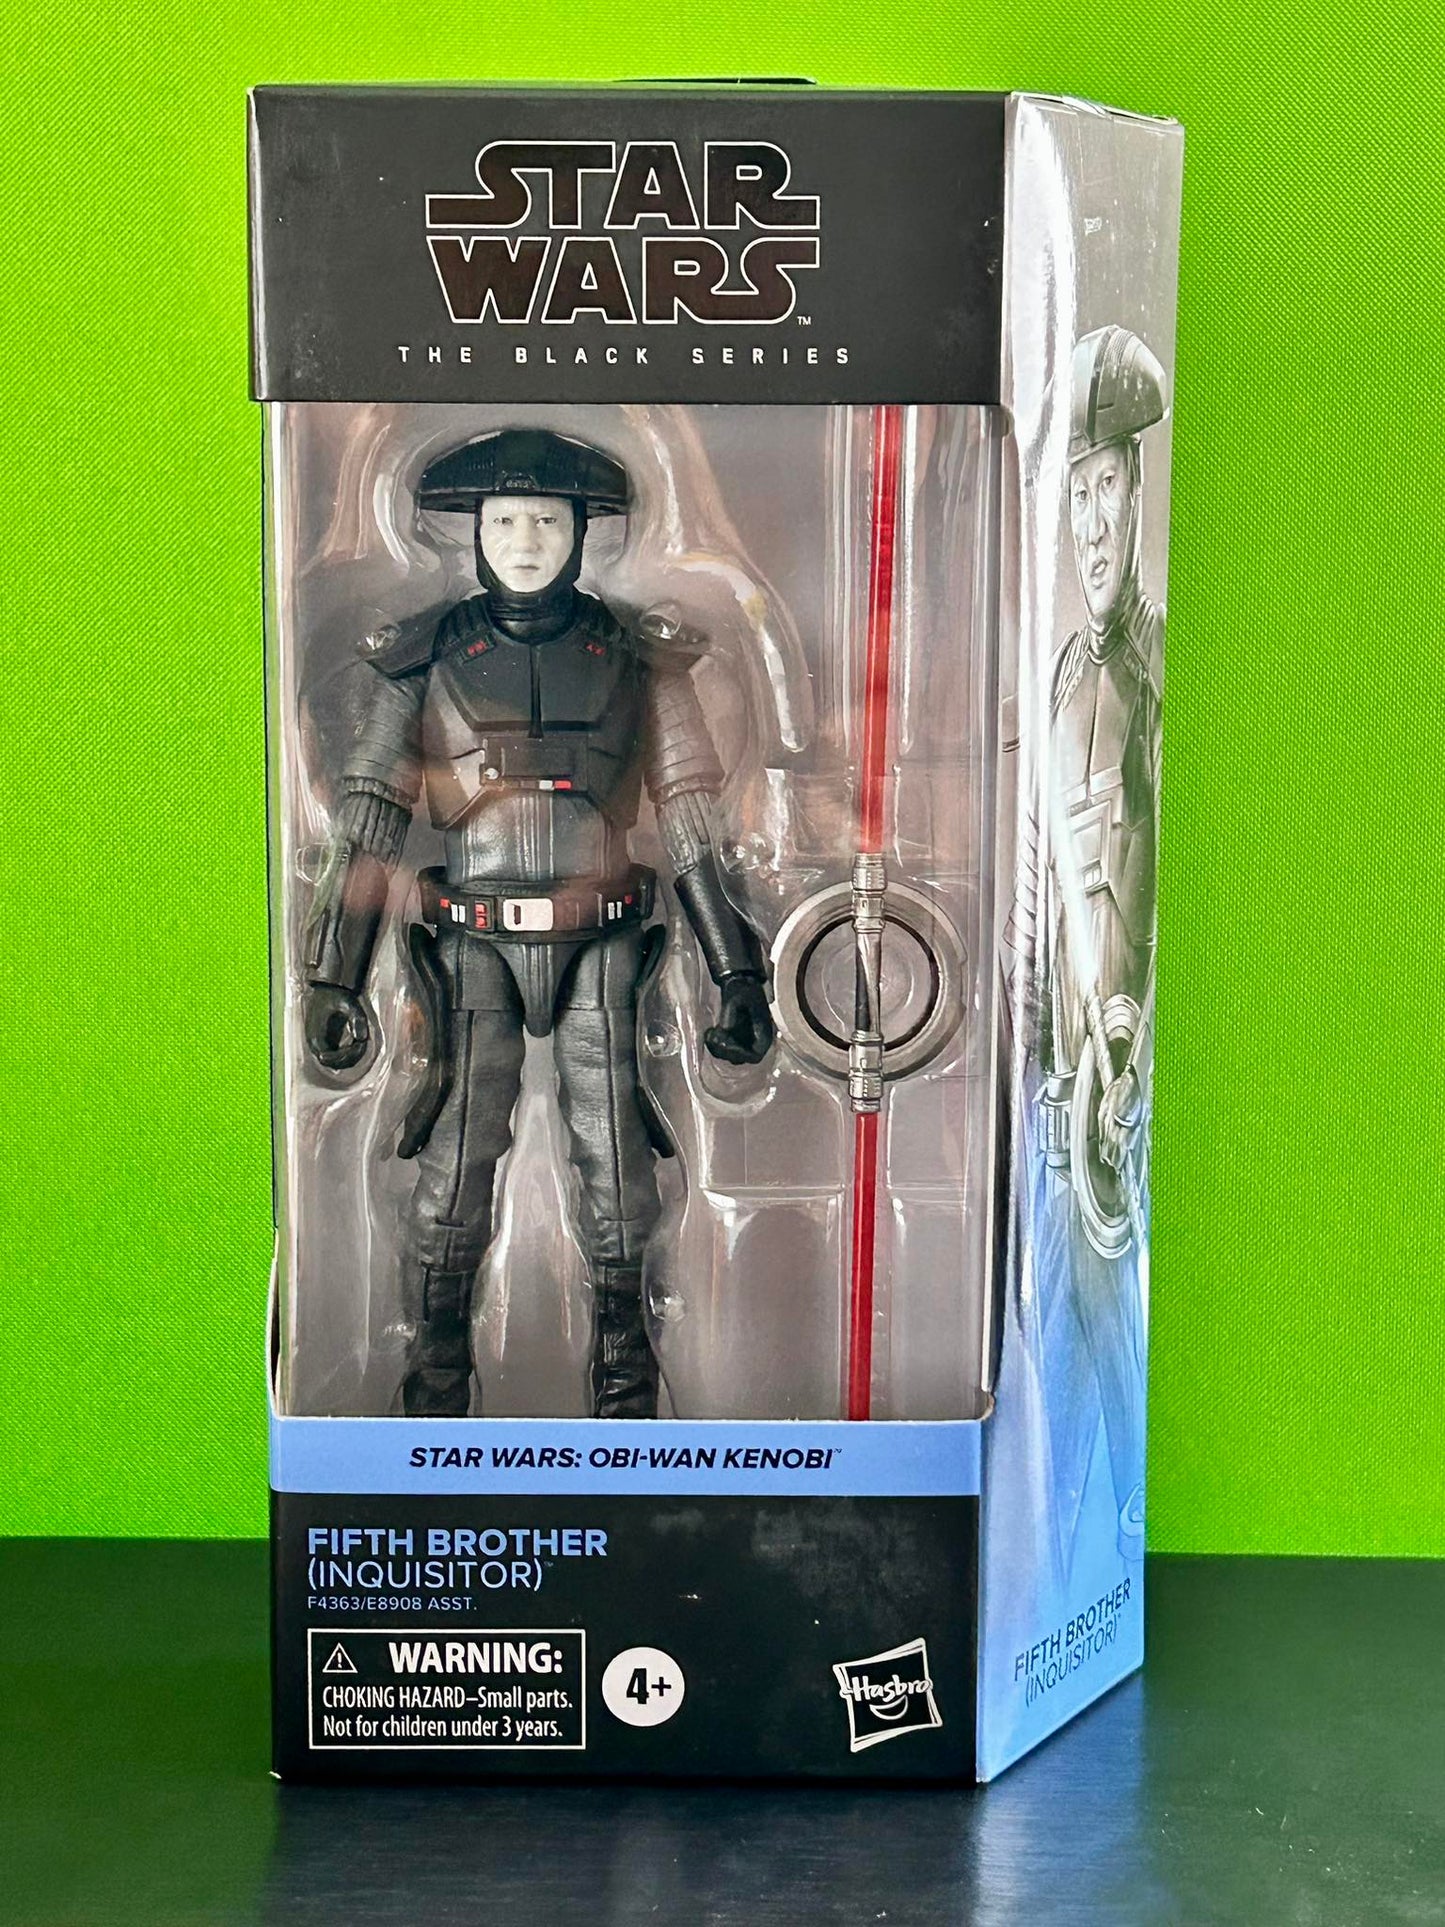 Star Wars The Black Series Archive - Fifth Brother (Inquisitor) Action Figure 15cm